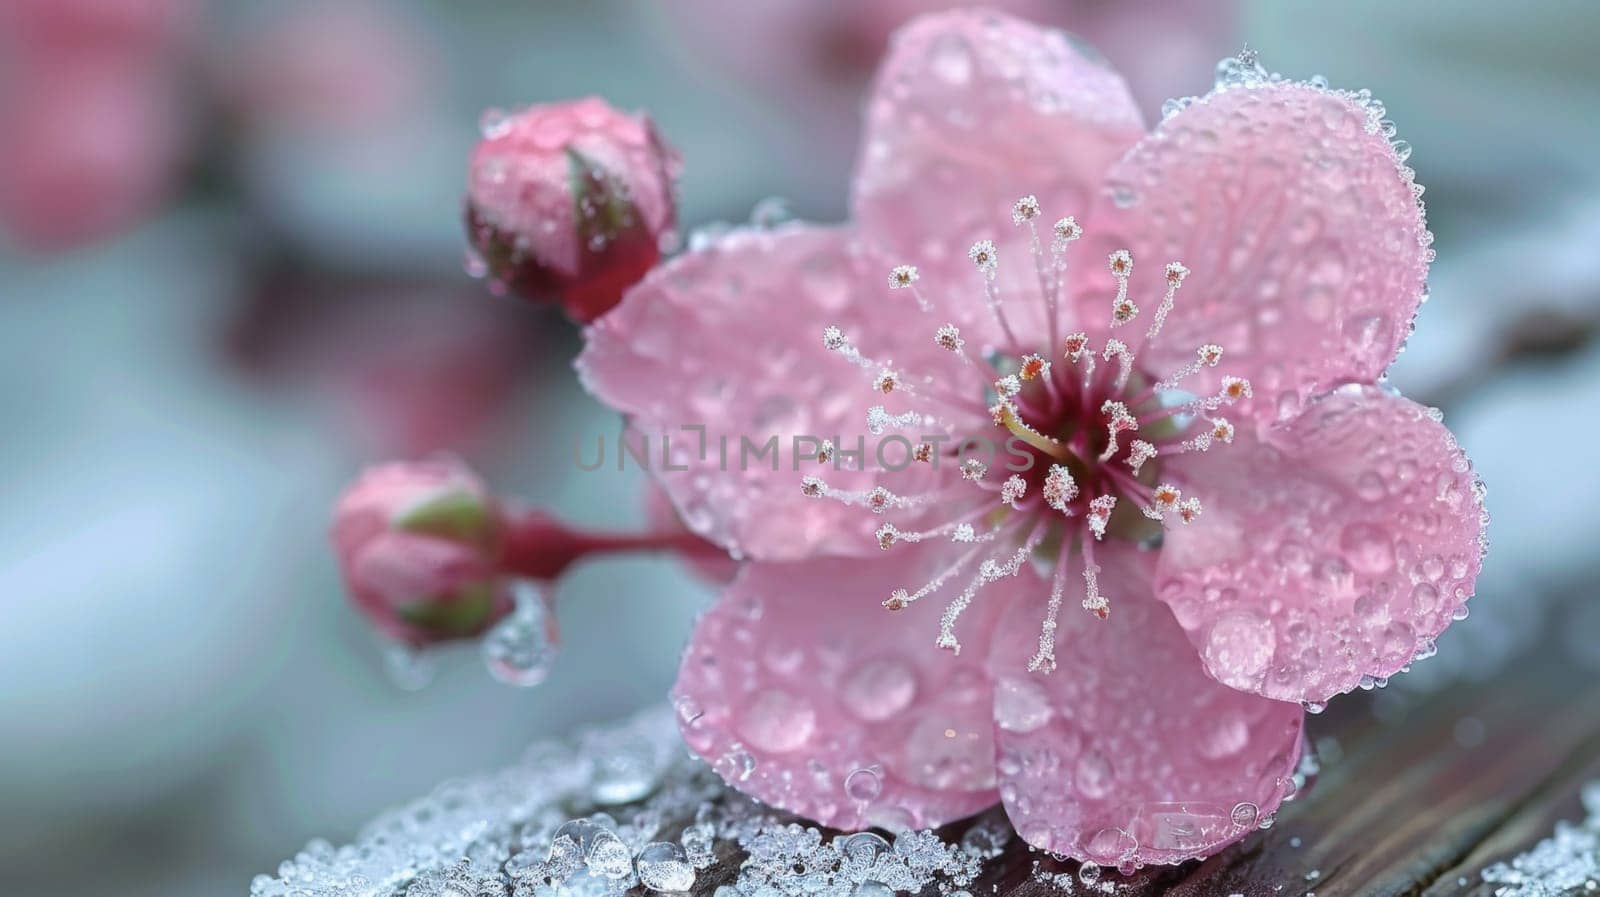 A close up of a pink flower with water droplets on it, AI by starush